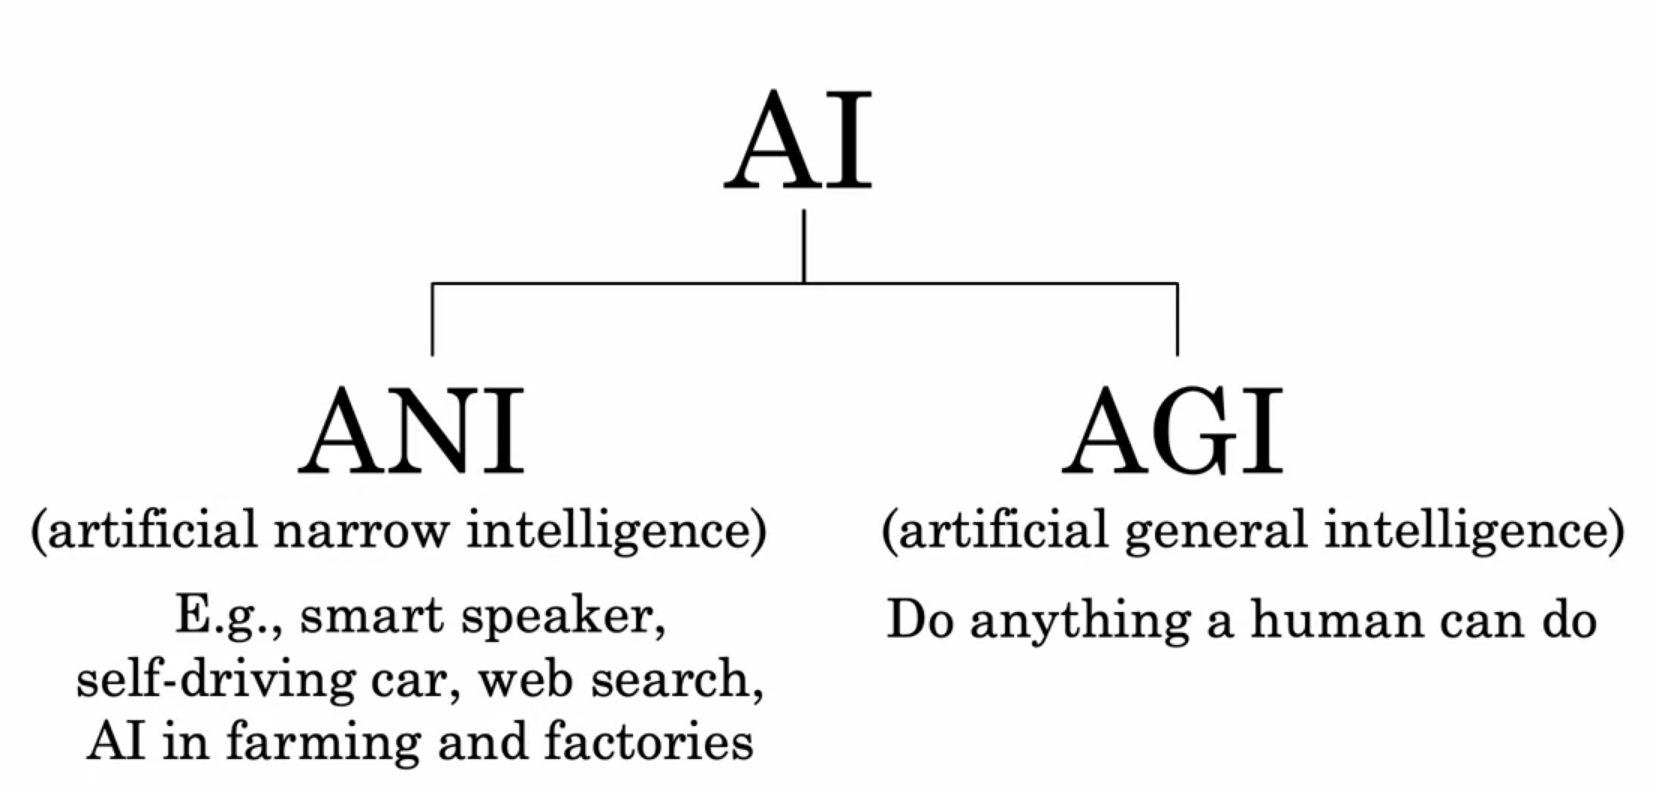 machine learning specialization assignments